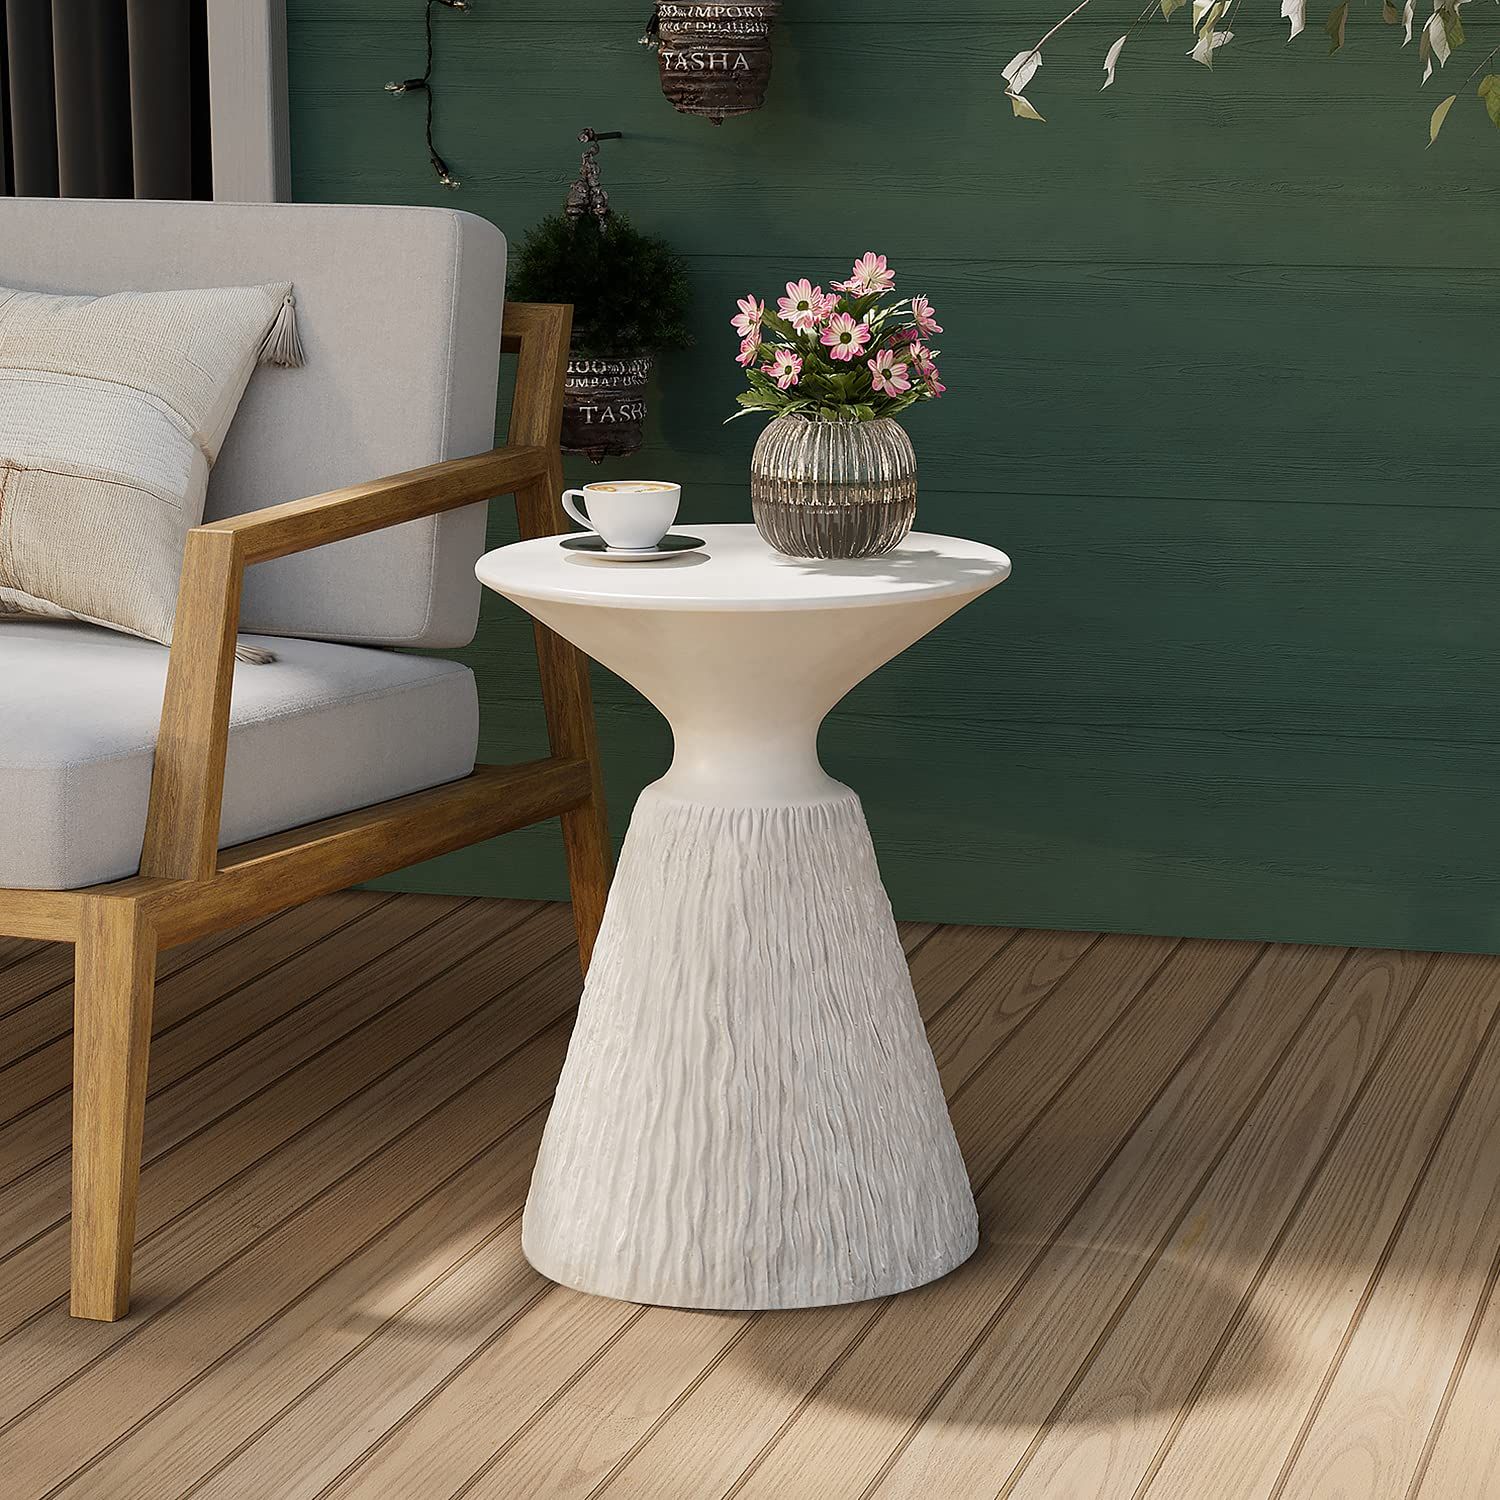 COSIEST Outdoor Side Table, Mushroom Shaped MgO Accent Table, Lightweight Patio End Table with Rotun | Amazon (US)